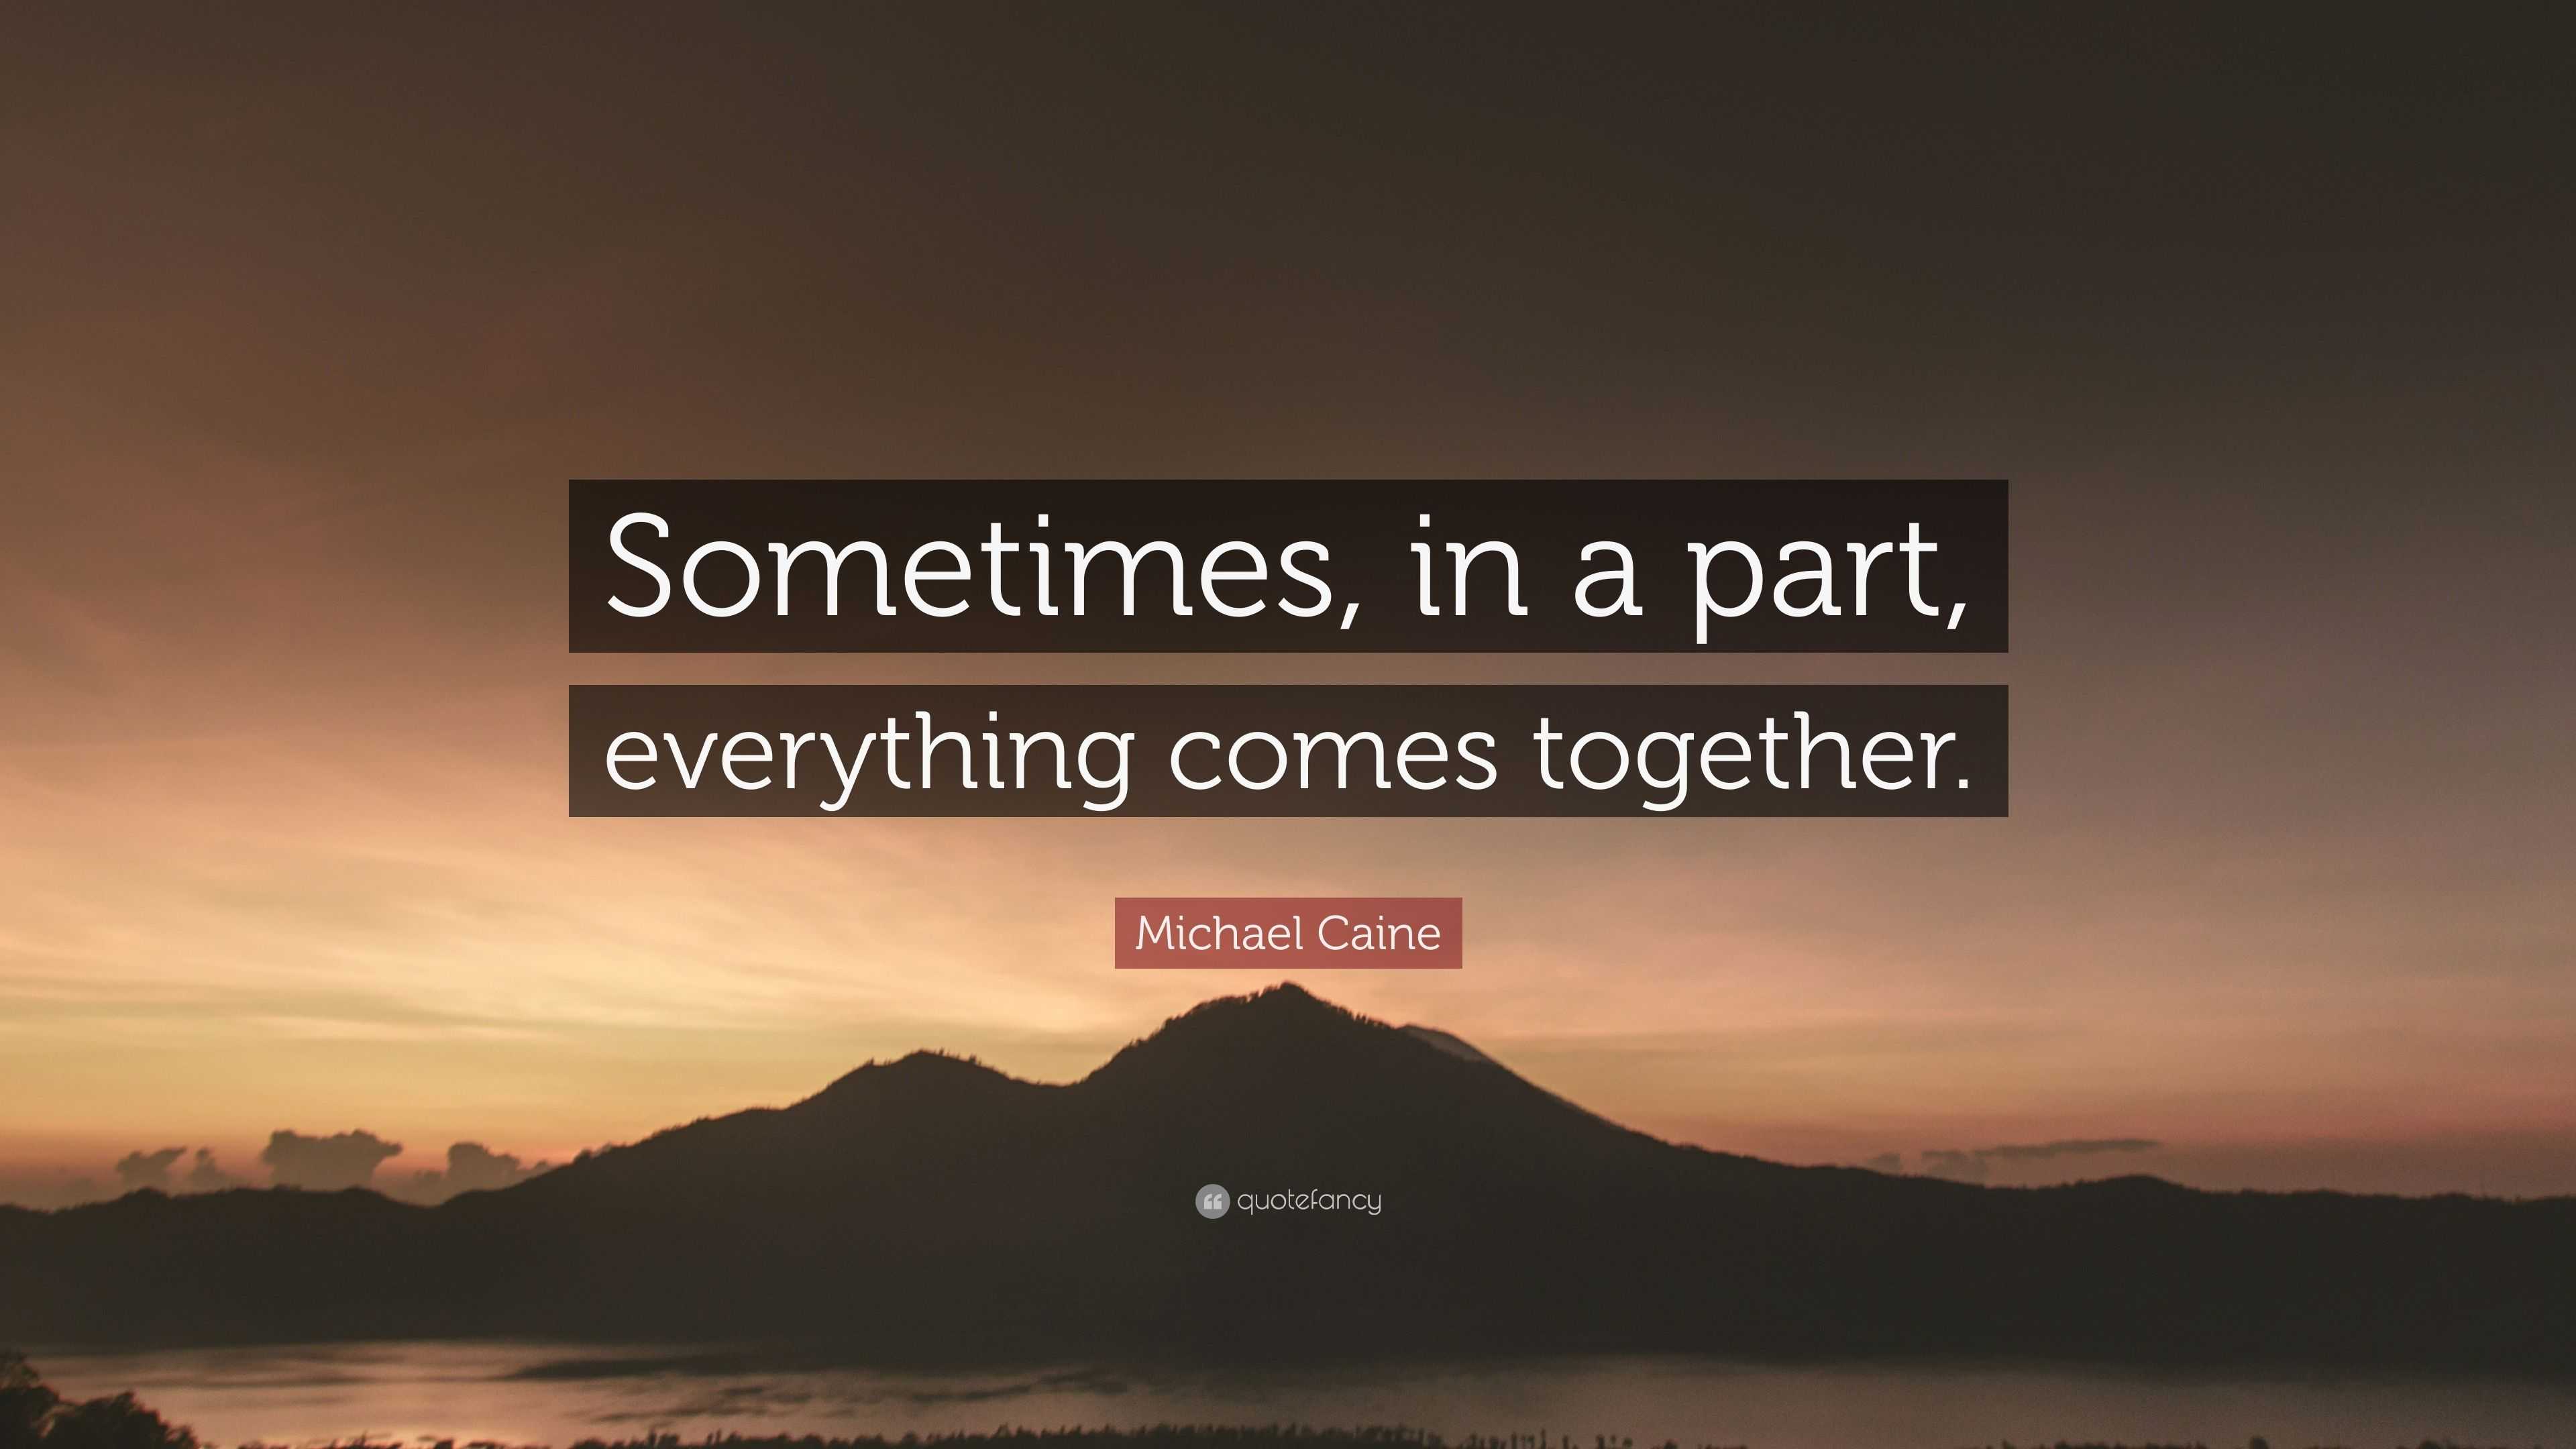 Michael Caine Quote: “Sometimes, in a part, everything comes together.”